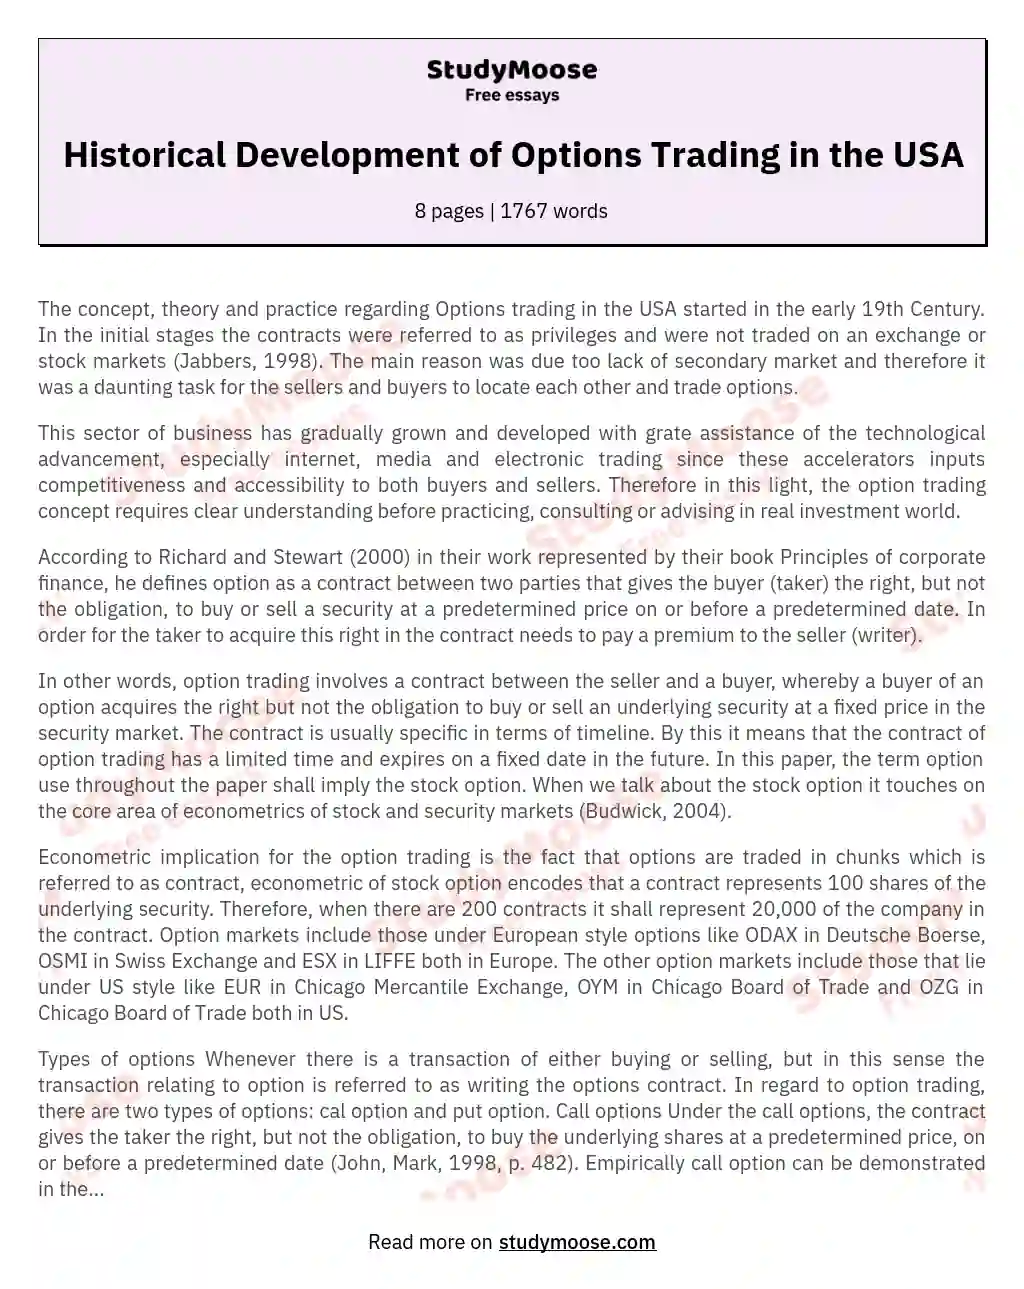 Historical Development of Options Trading in the USA essay